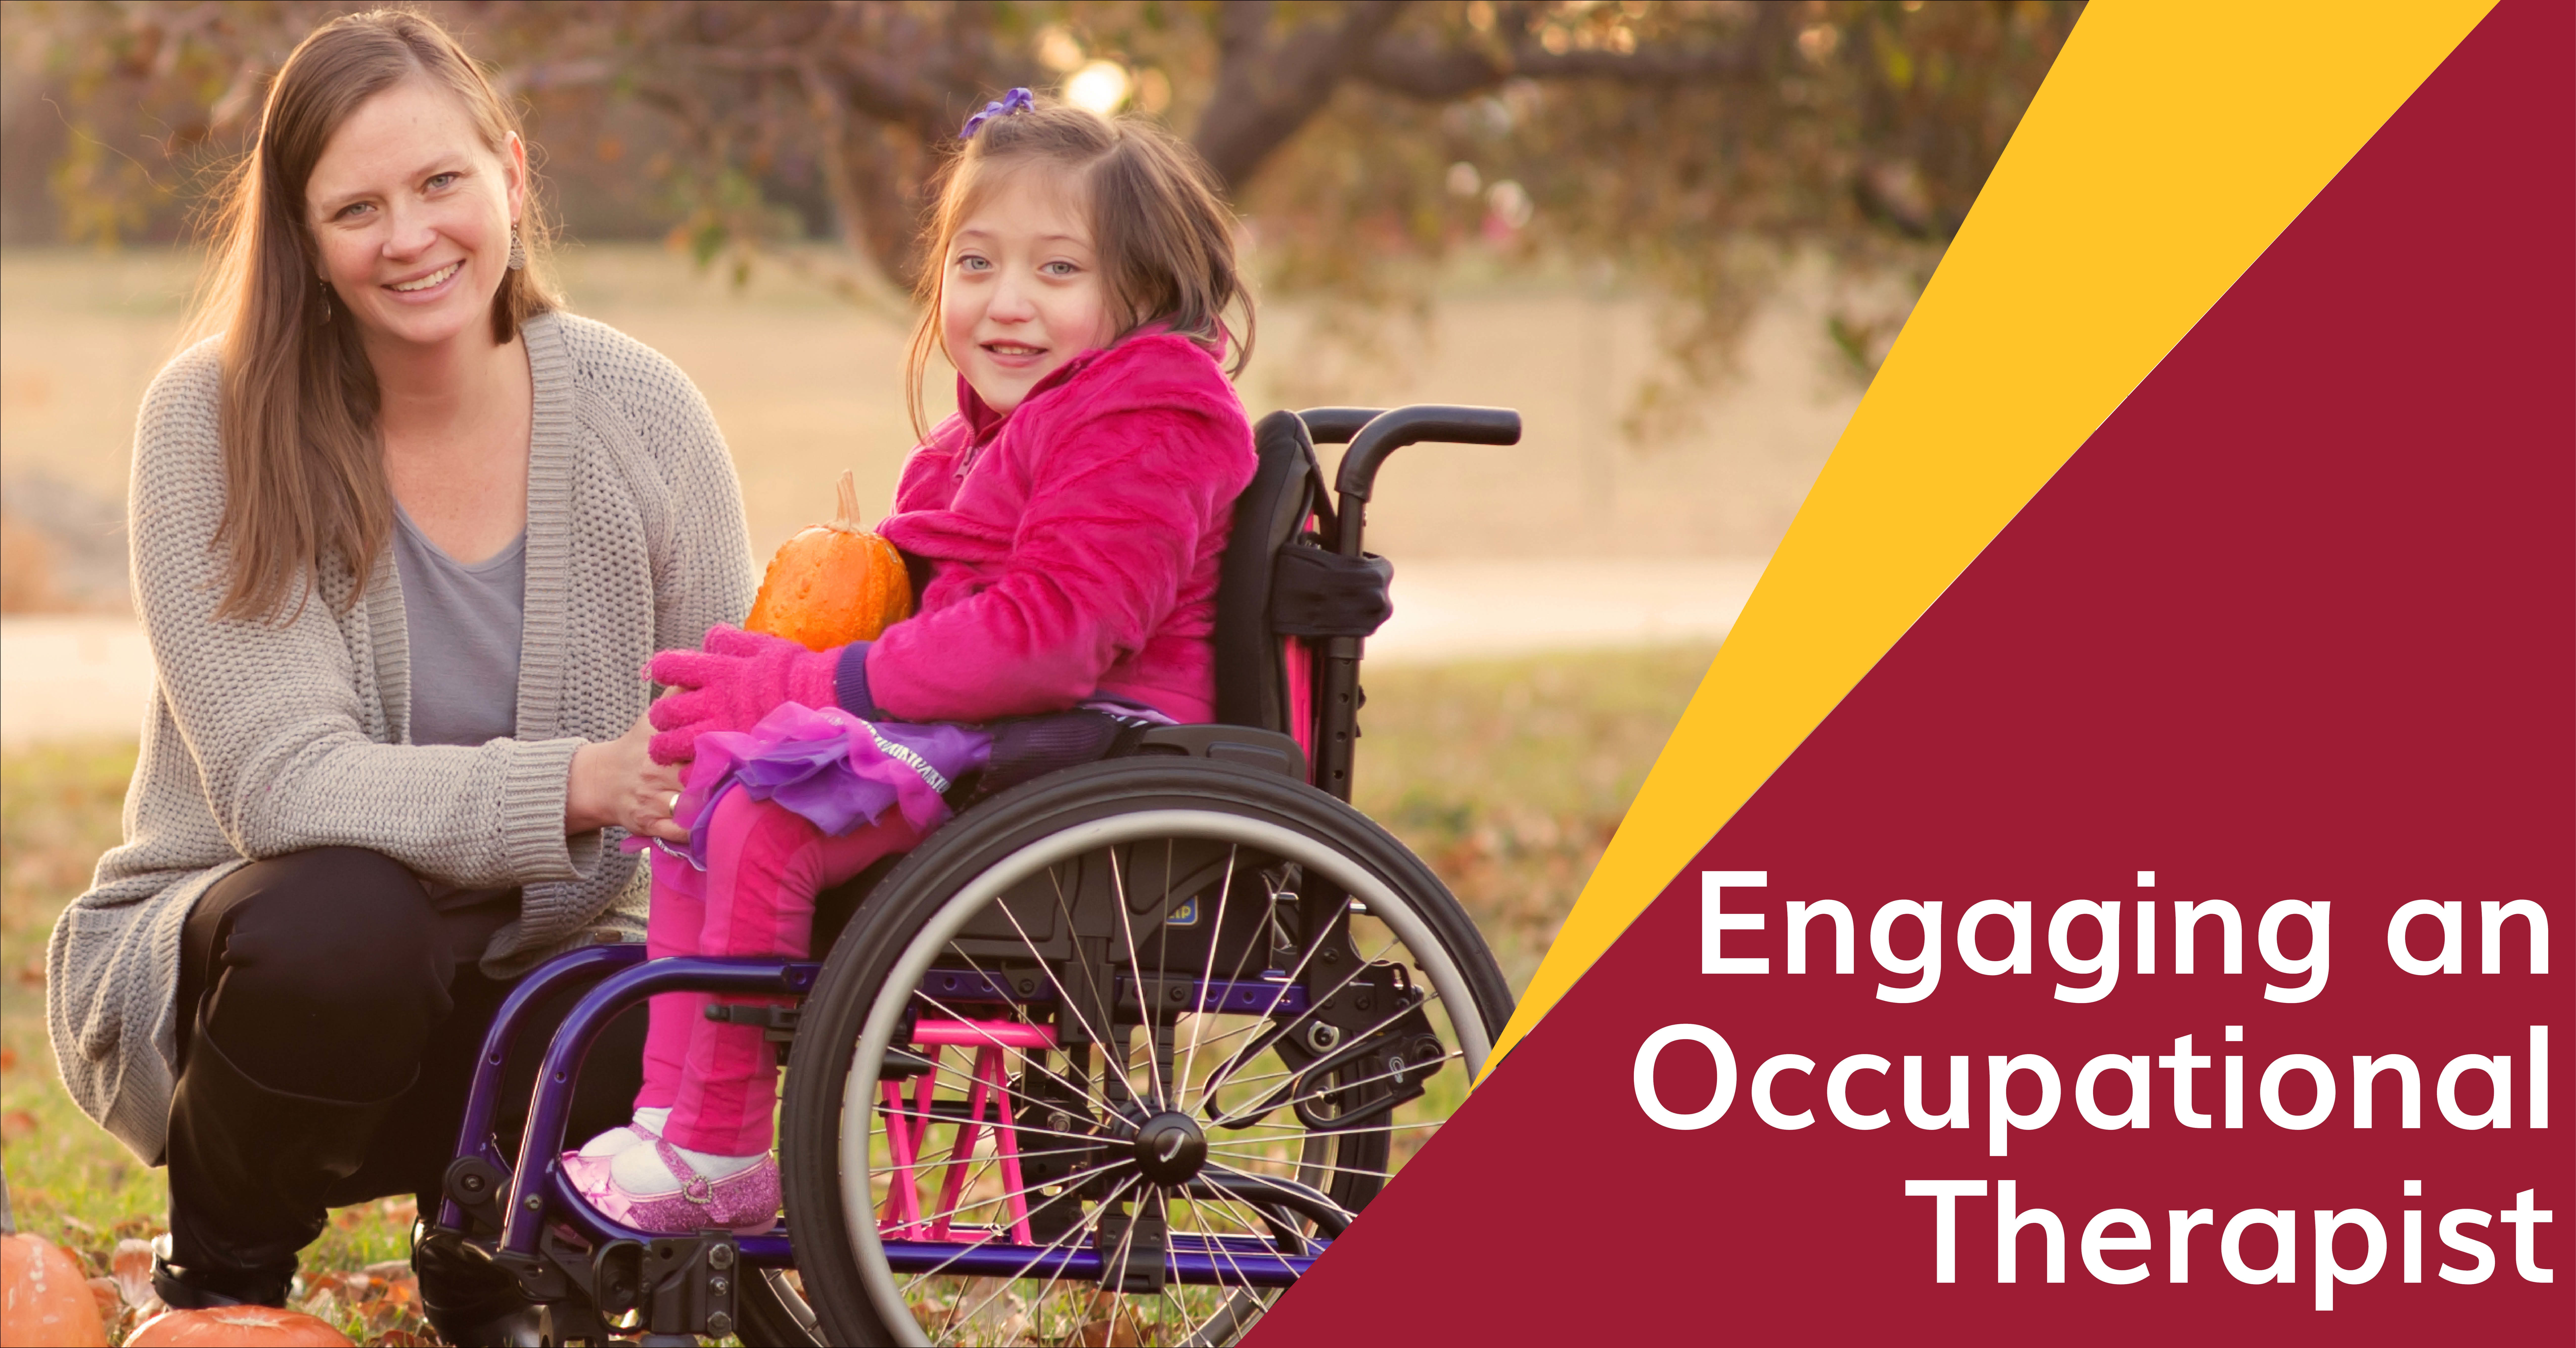 Engaging an Occupational Therapist